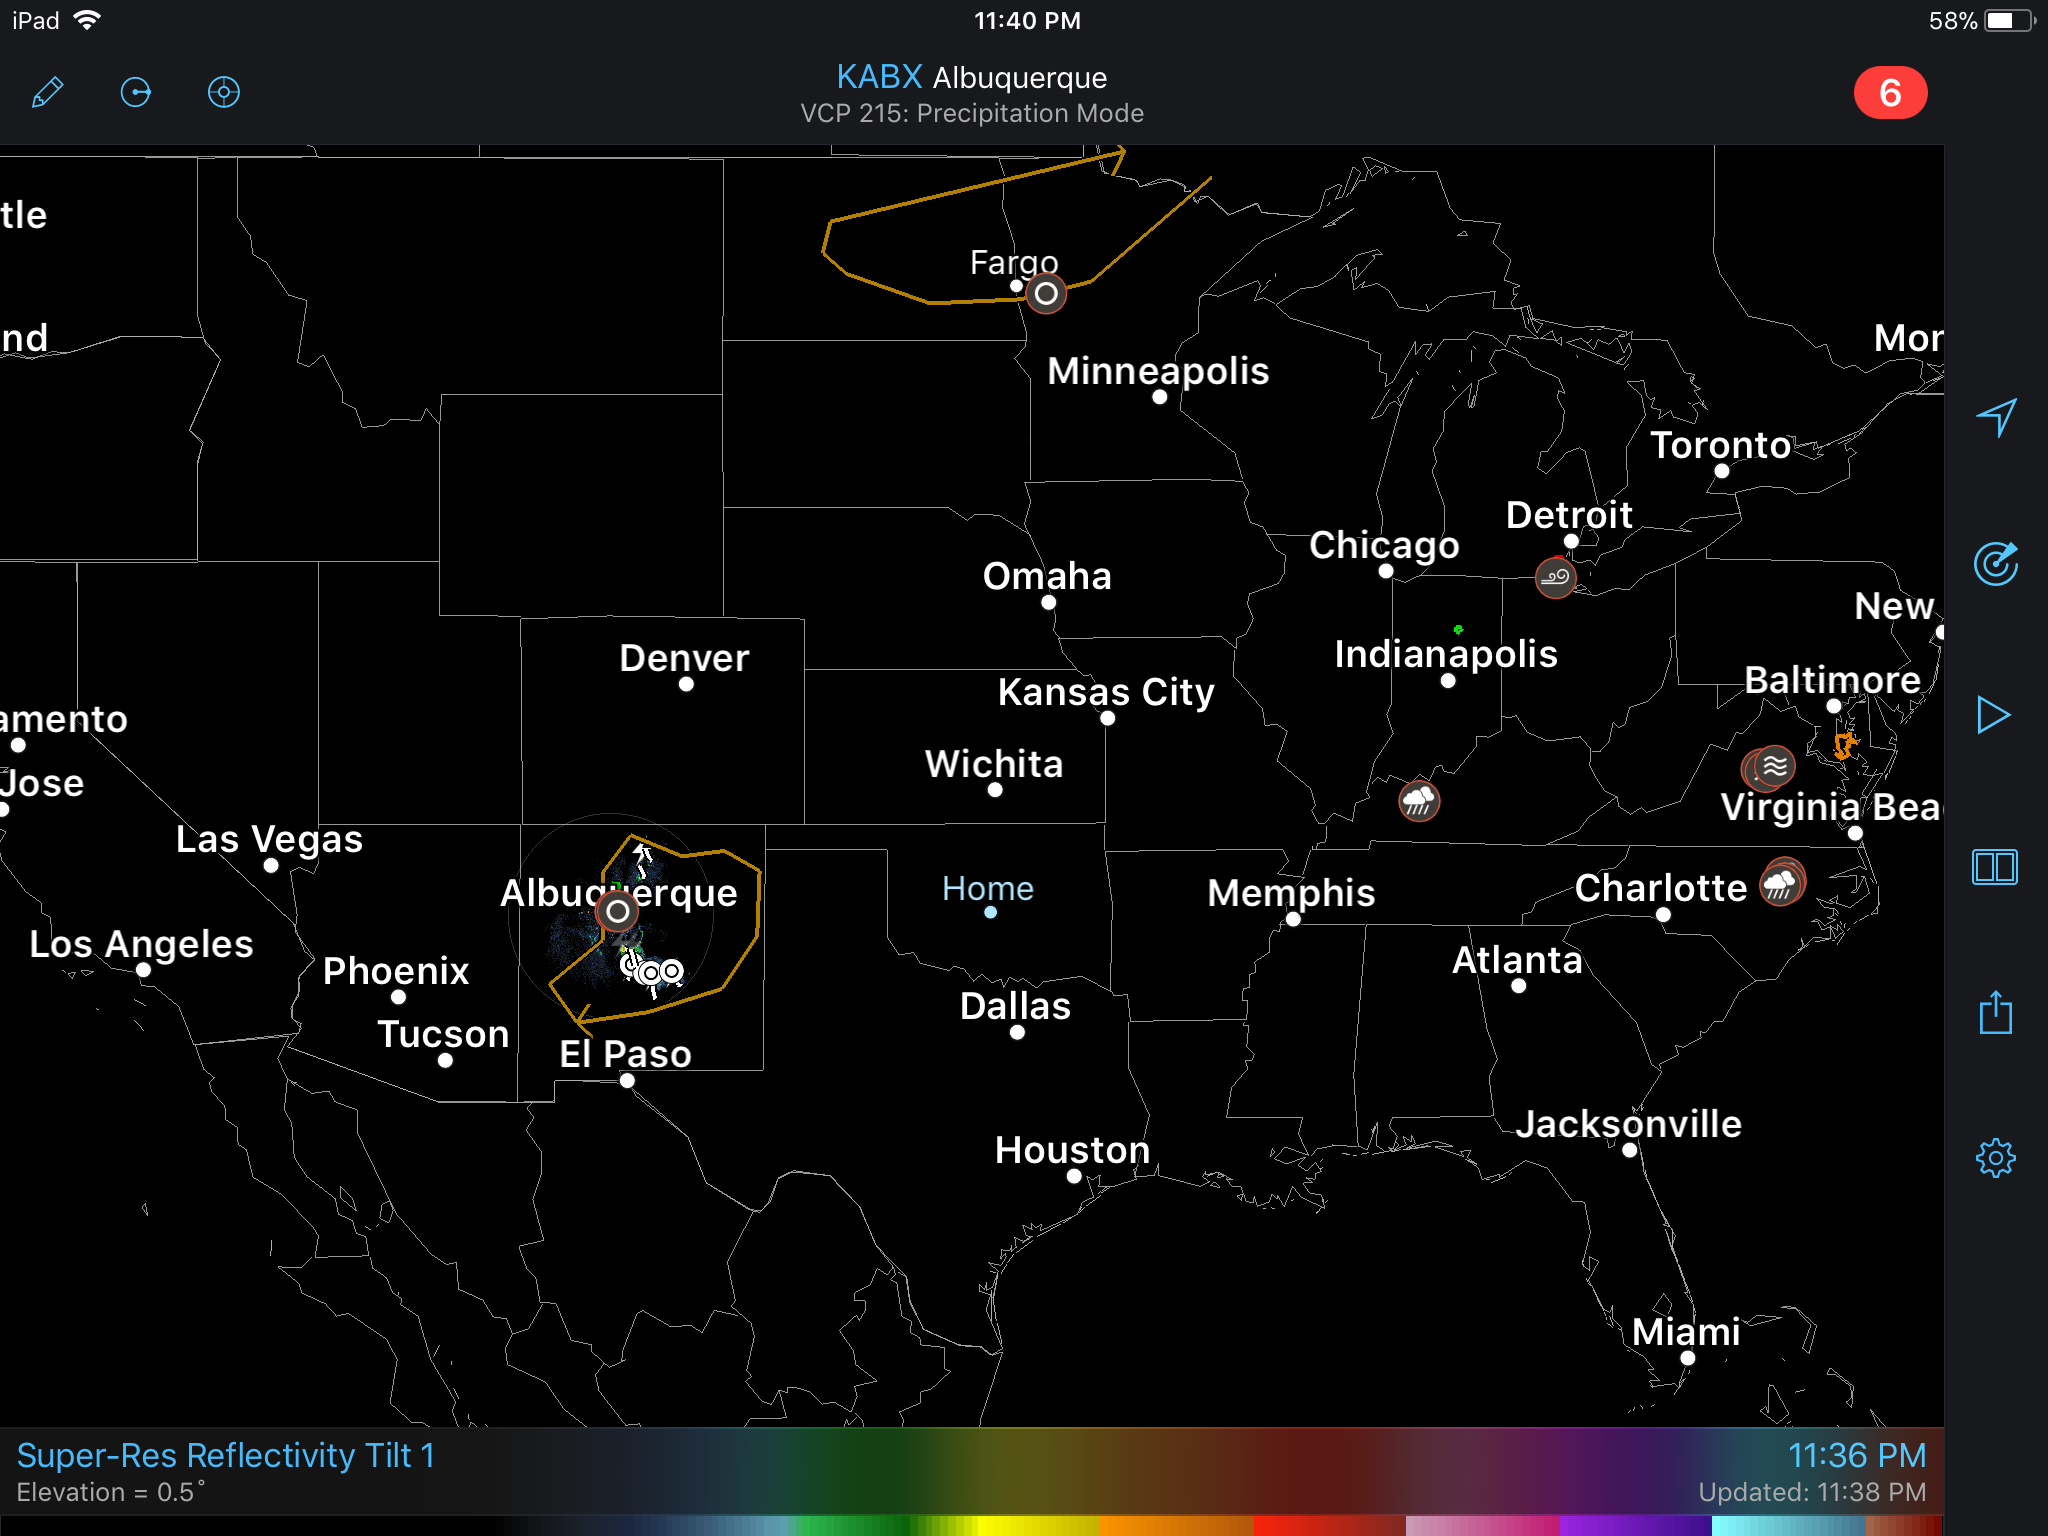 Day 1 Convective Outlook in RadarScope